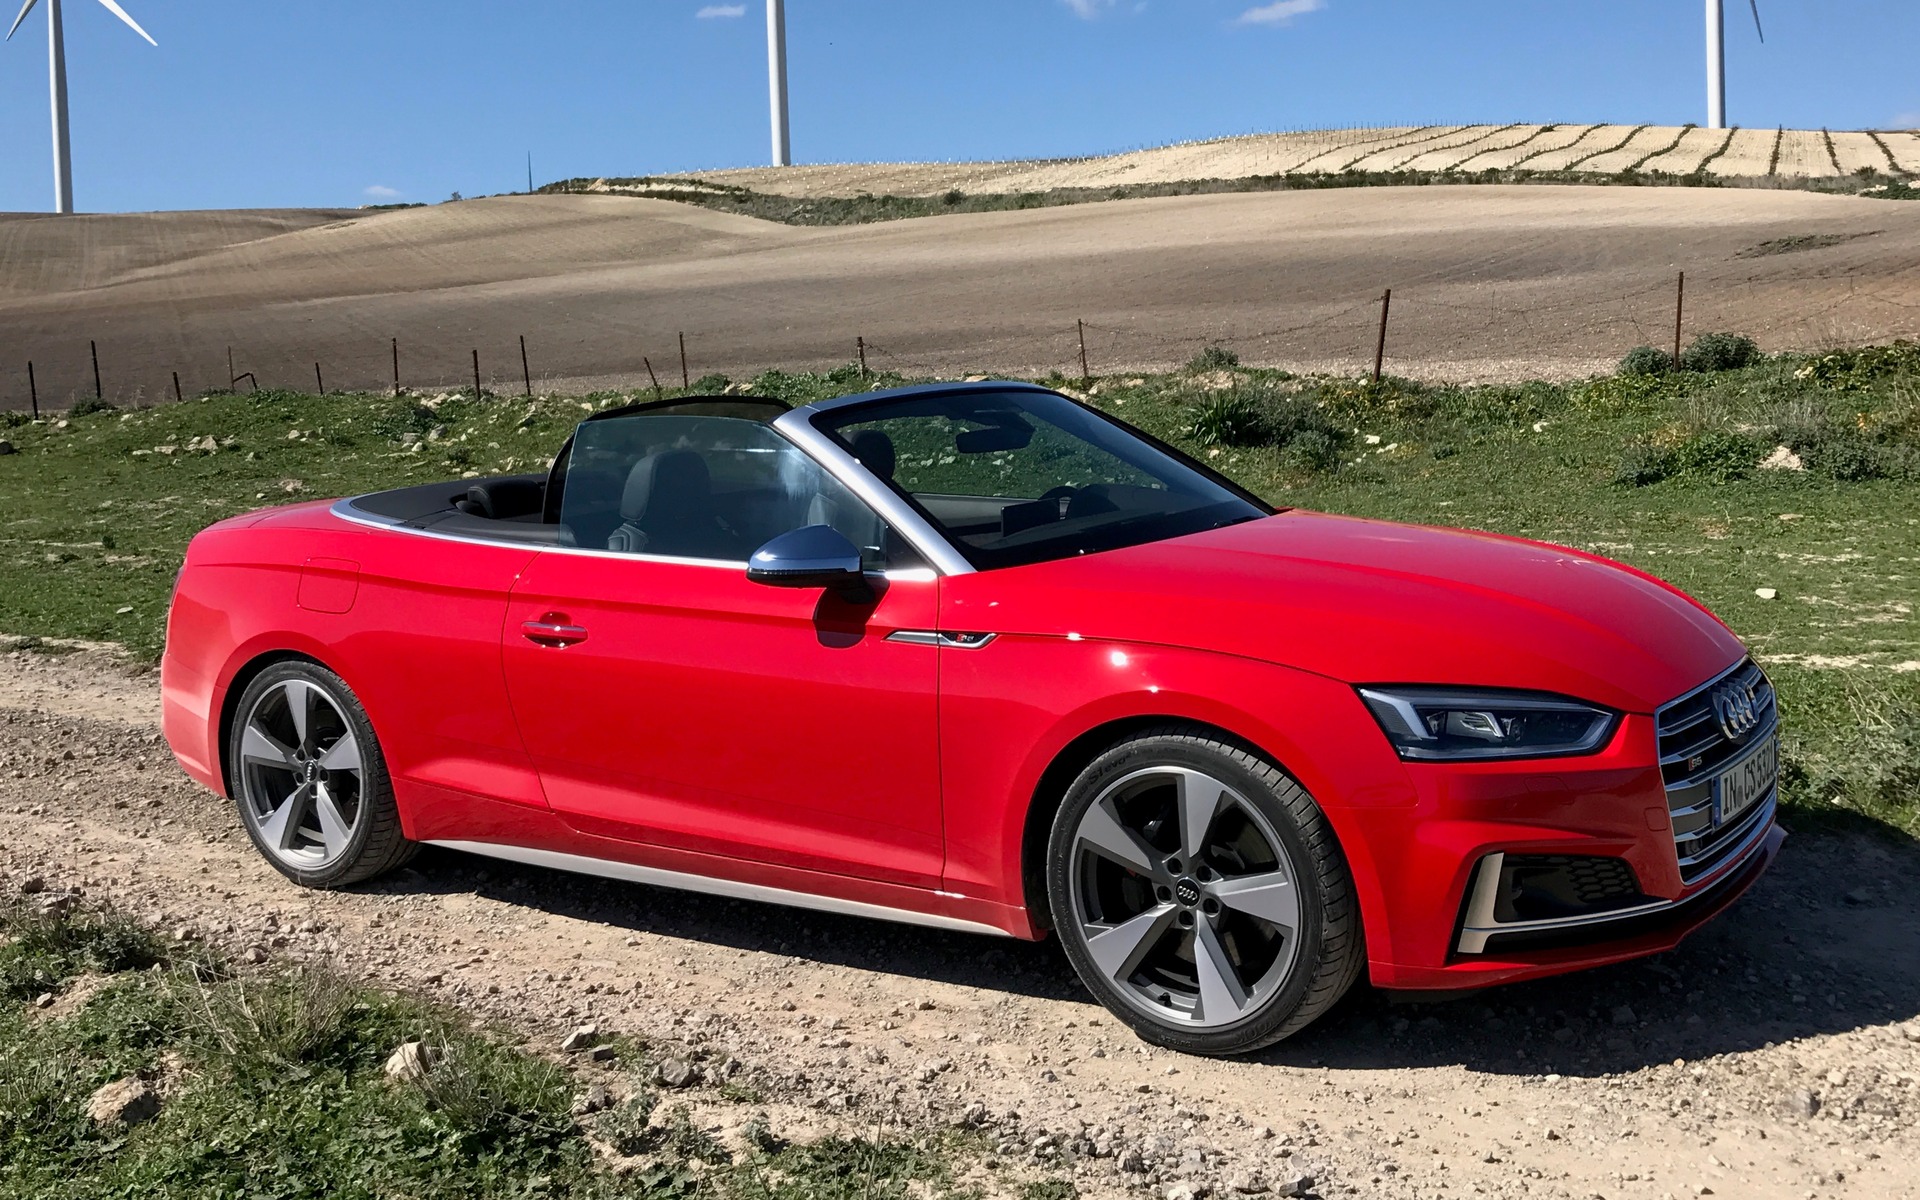 lur bred krystal 2018 Audi A5 and S5 Cabriolet: Just a Fraction of Audi's Arsenal! - The Car  Guide